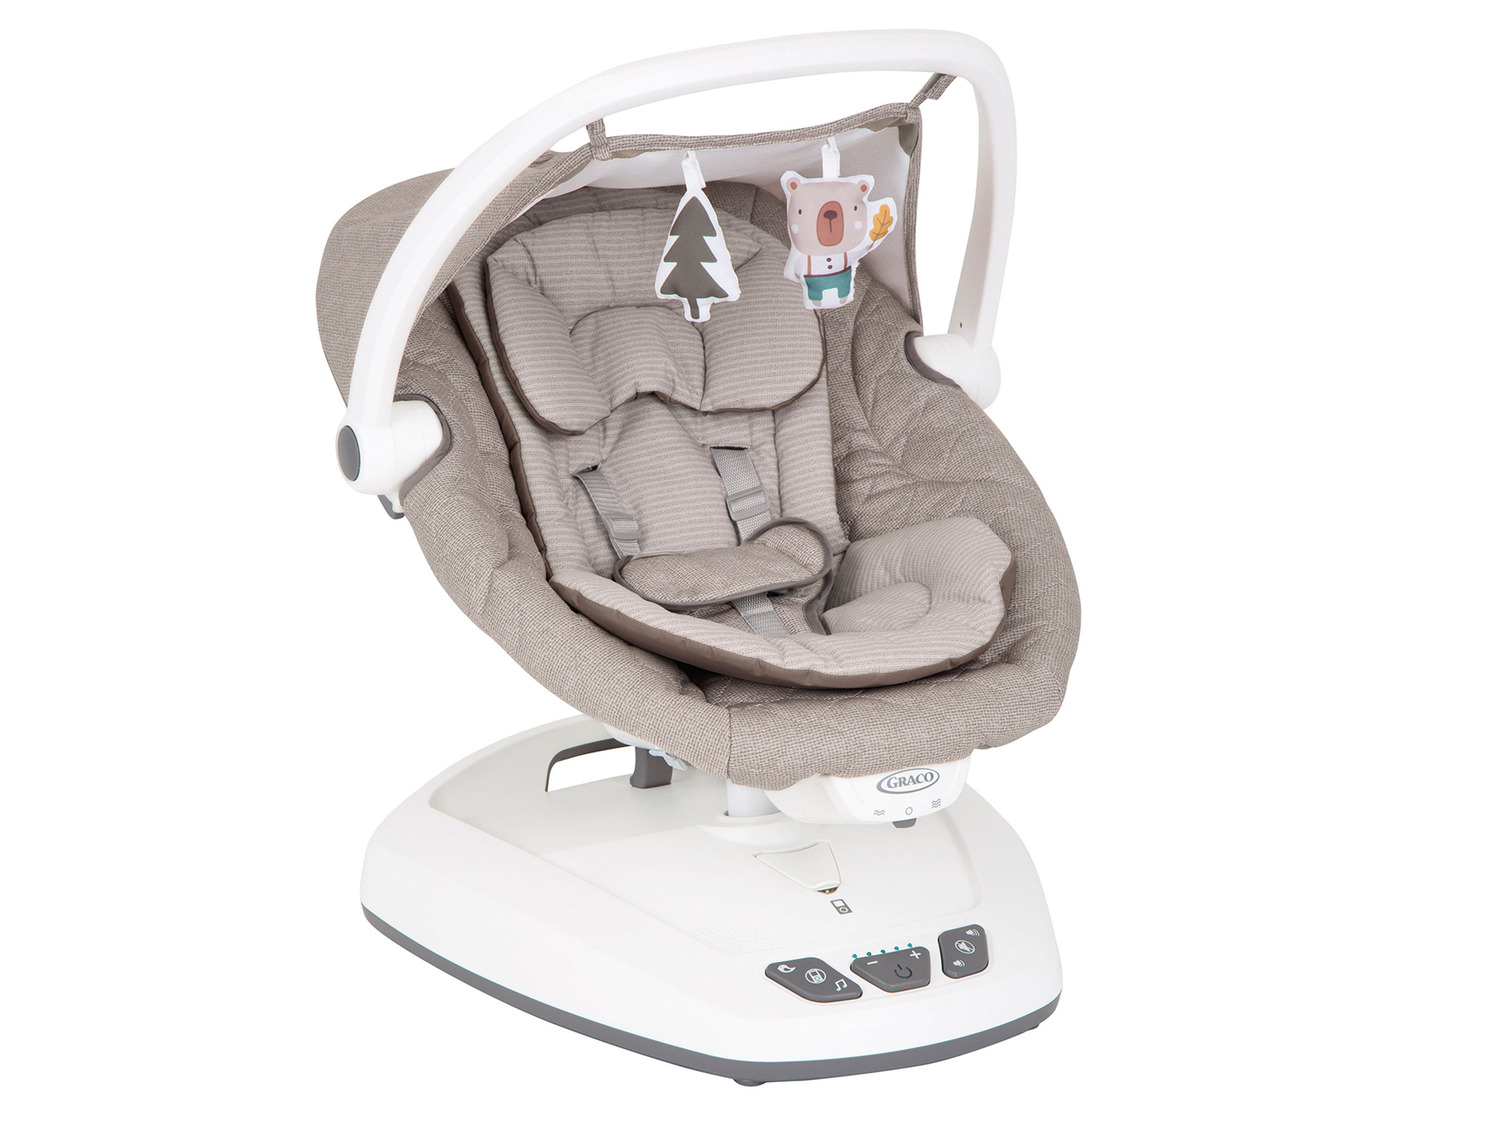 Graco Babyschaukel »Move with Me®«, LIDL | faltbar